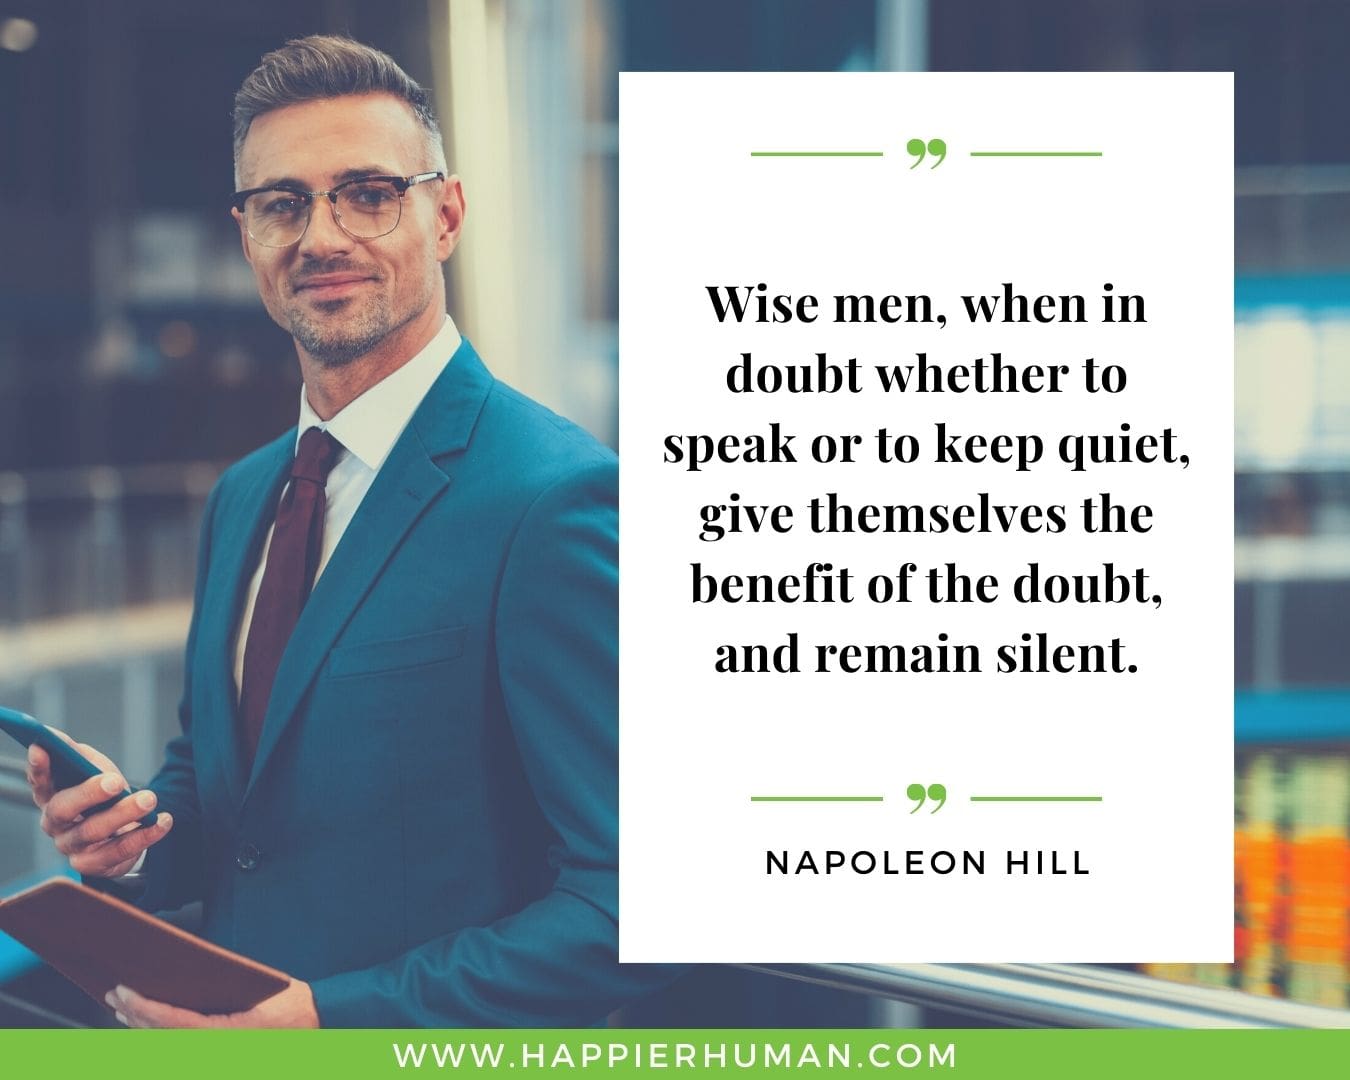 Introvert Quotes - “Wise men, when in doubt whether to speak or to keep quiet, give themselves the benefit of the doubt, and remain silent.” – Napoleon Hill